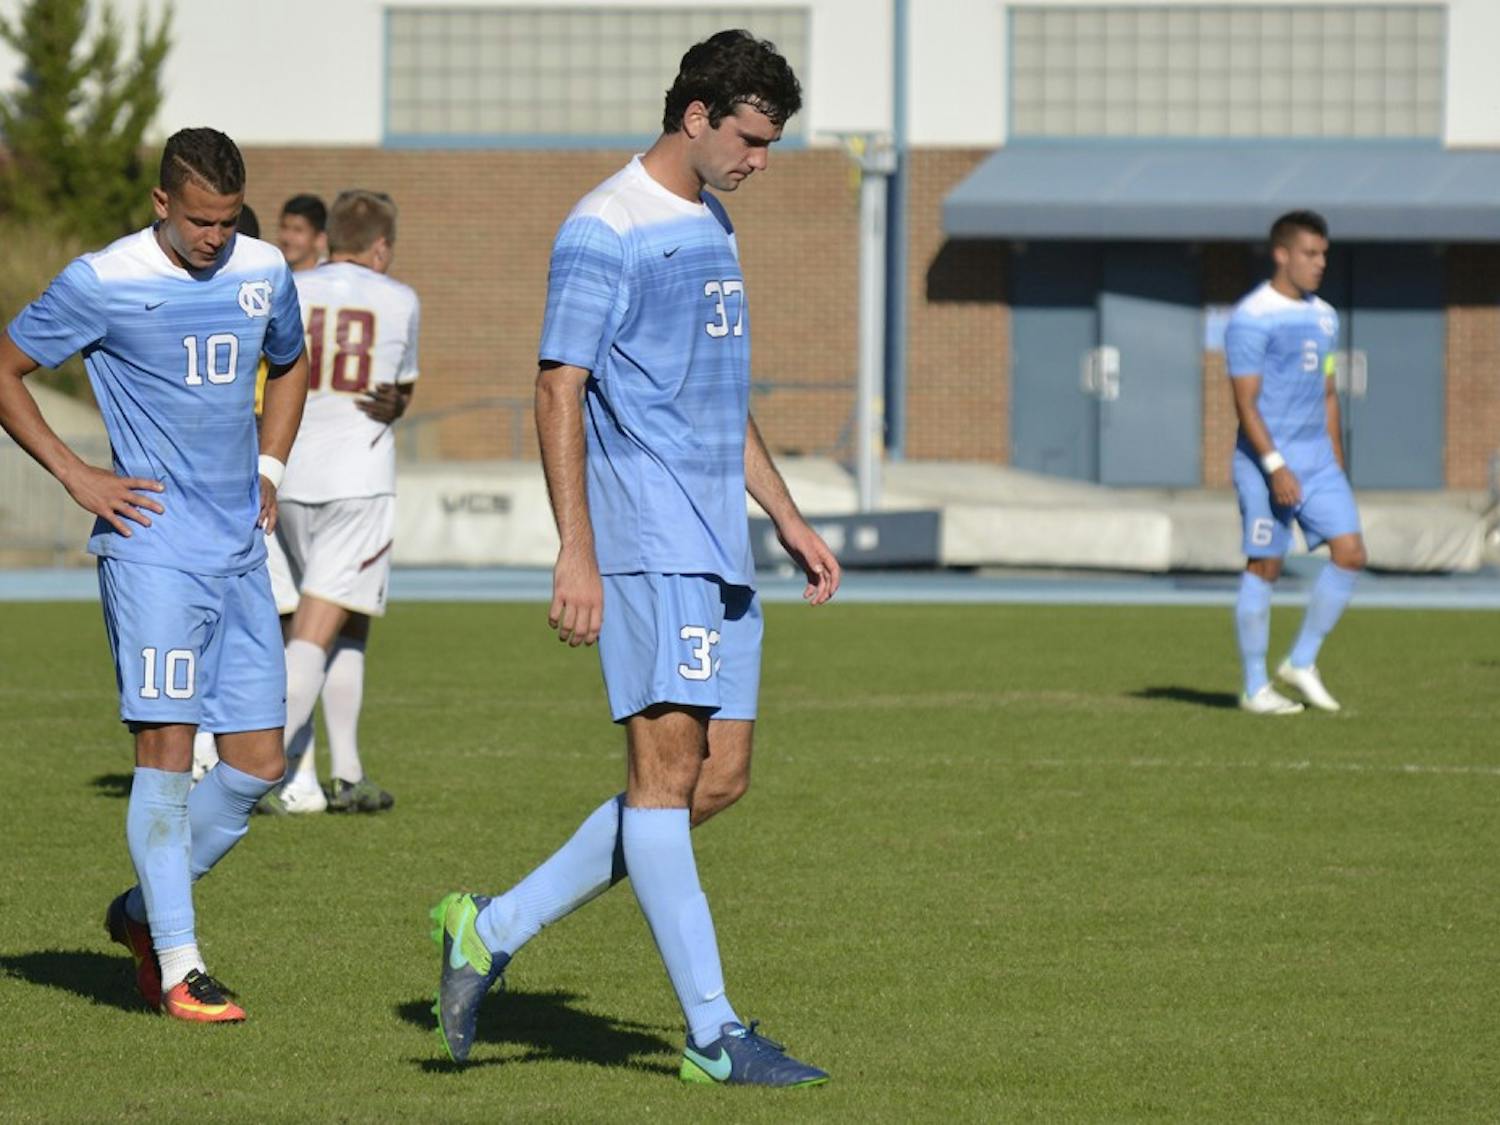 UNC Men's Soccer fell to Boston College on Sunday, Nov. 6, in the second round of the ACC tournament. The final score was 1-0.